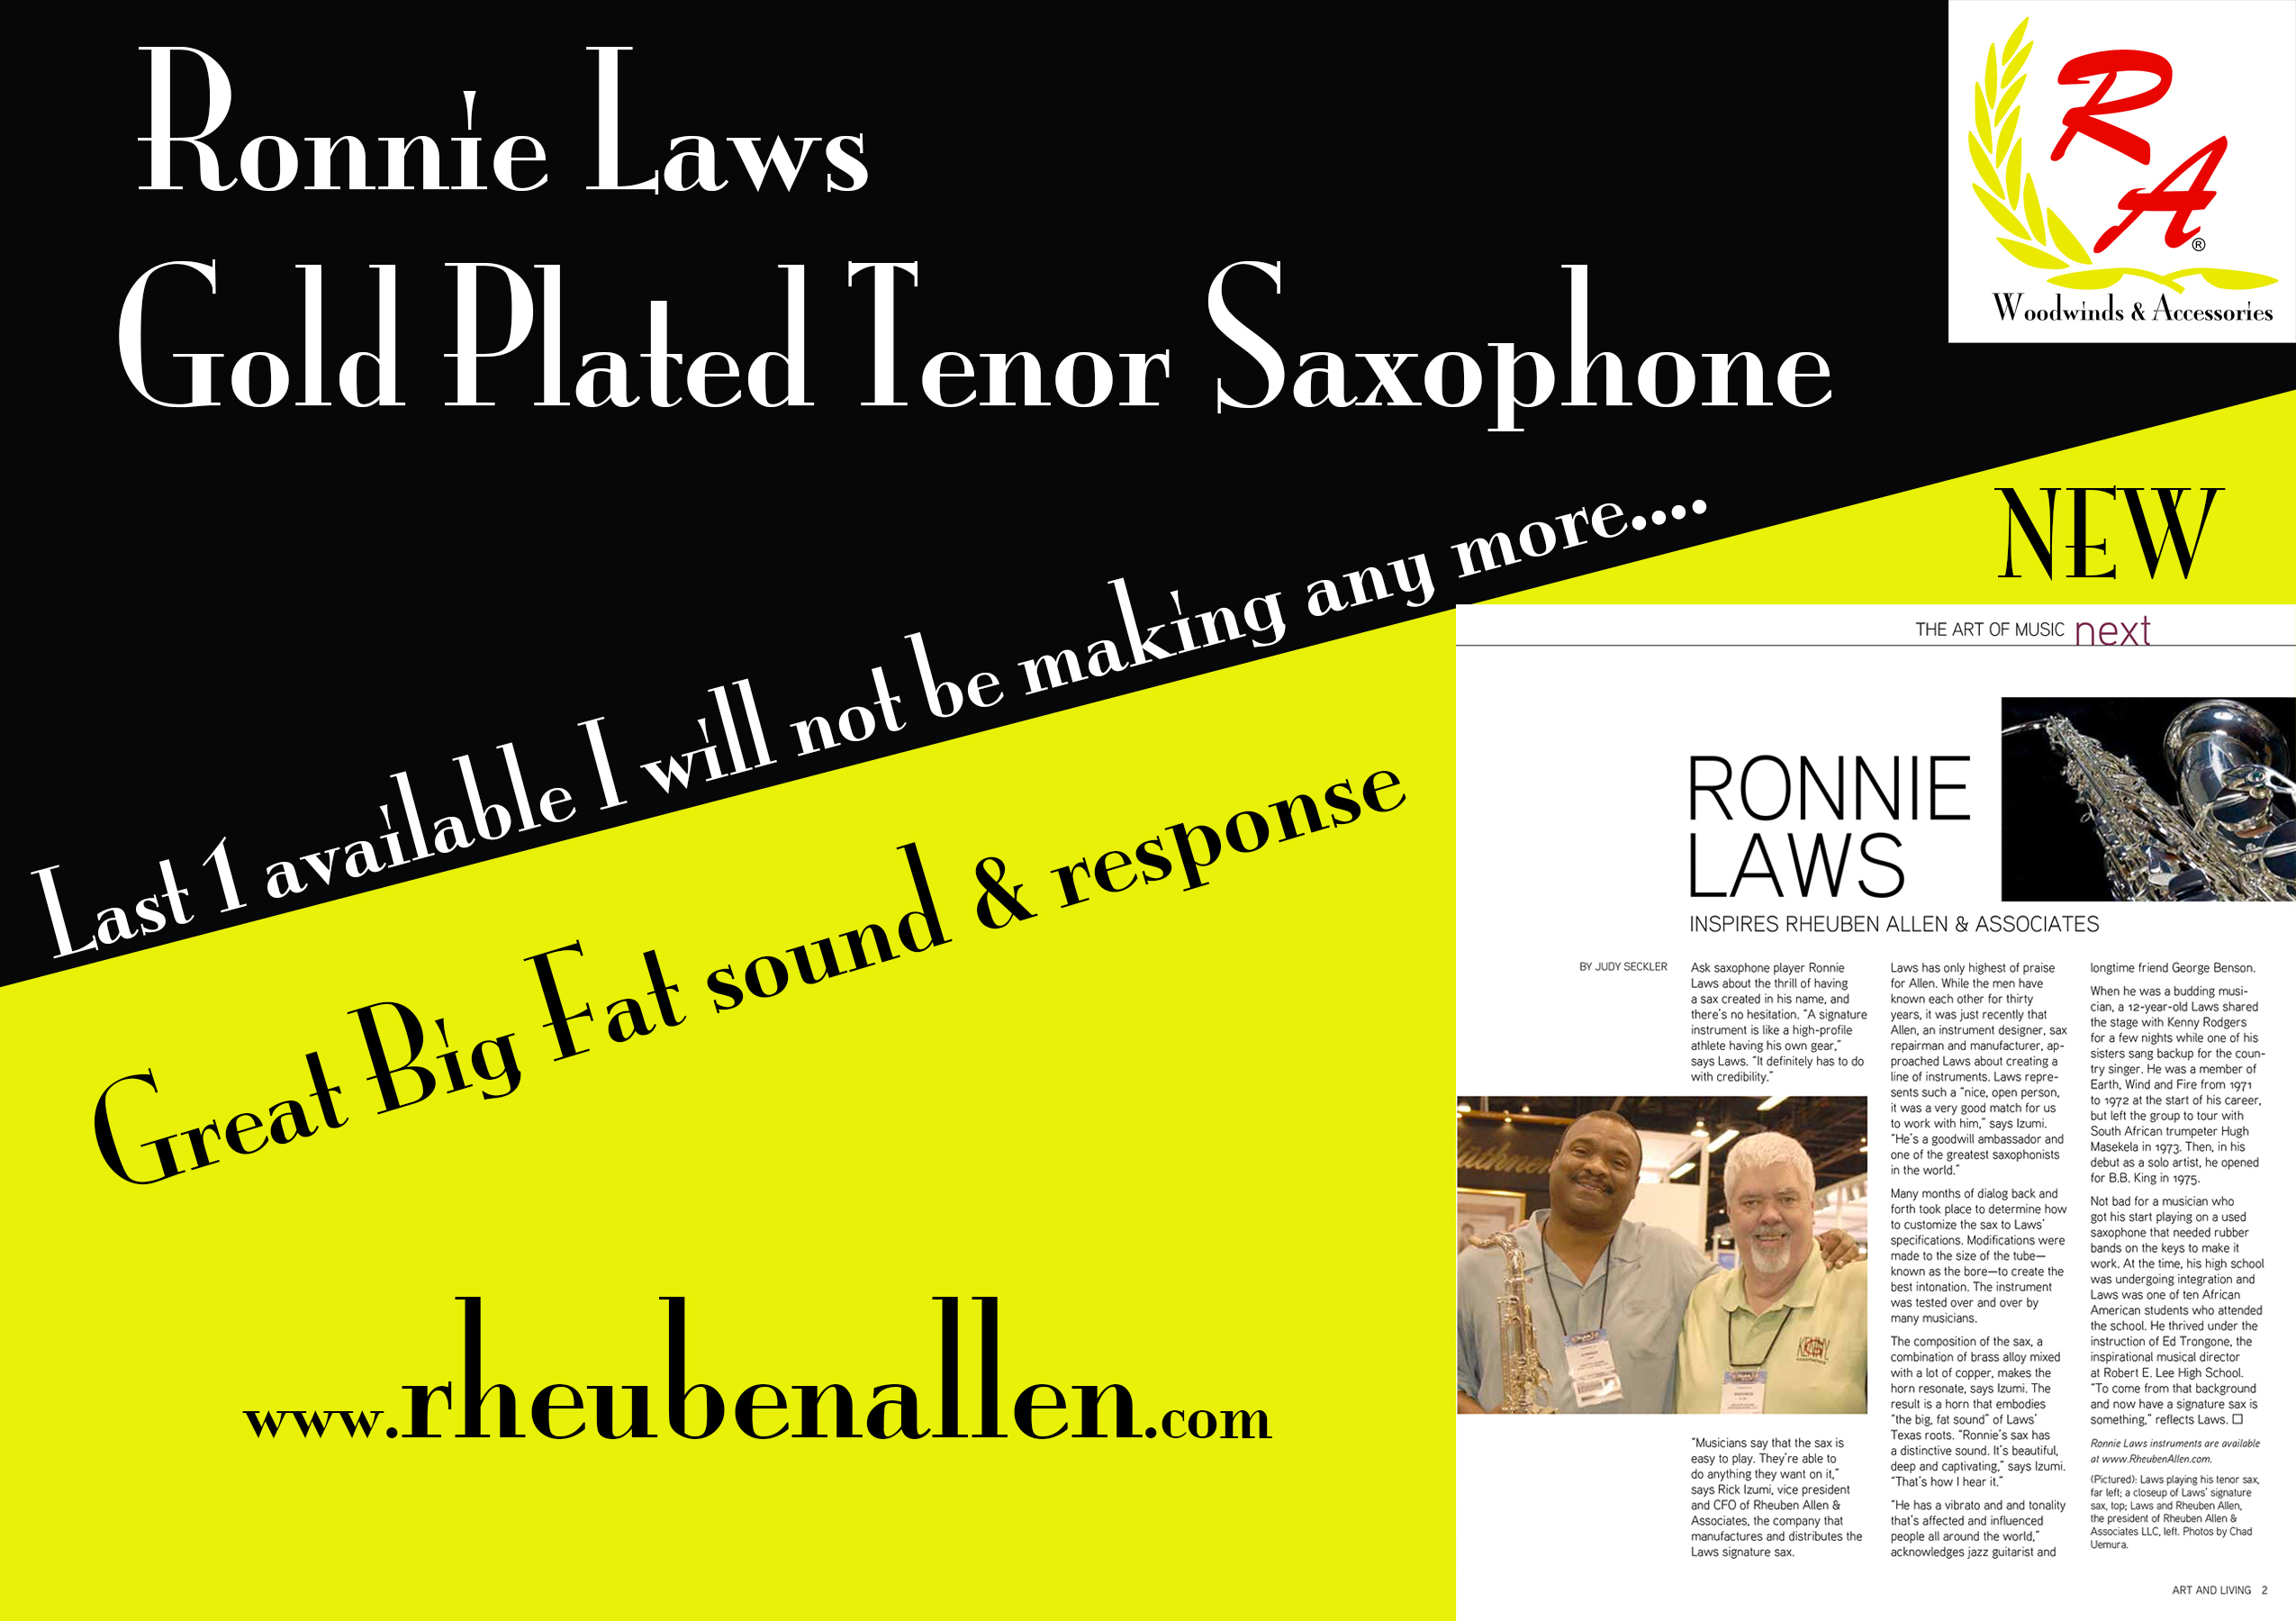 Ronnie Laws Gold Plated tenor saxophone